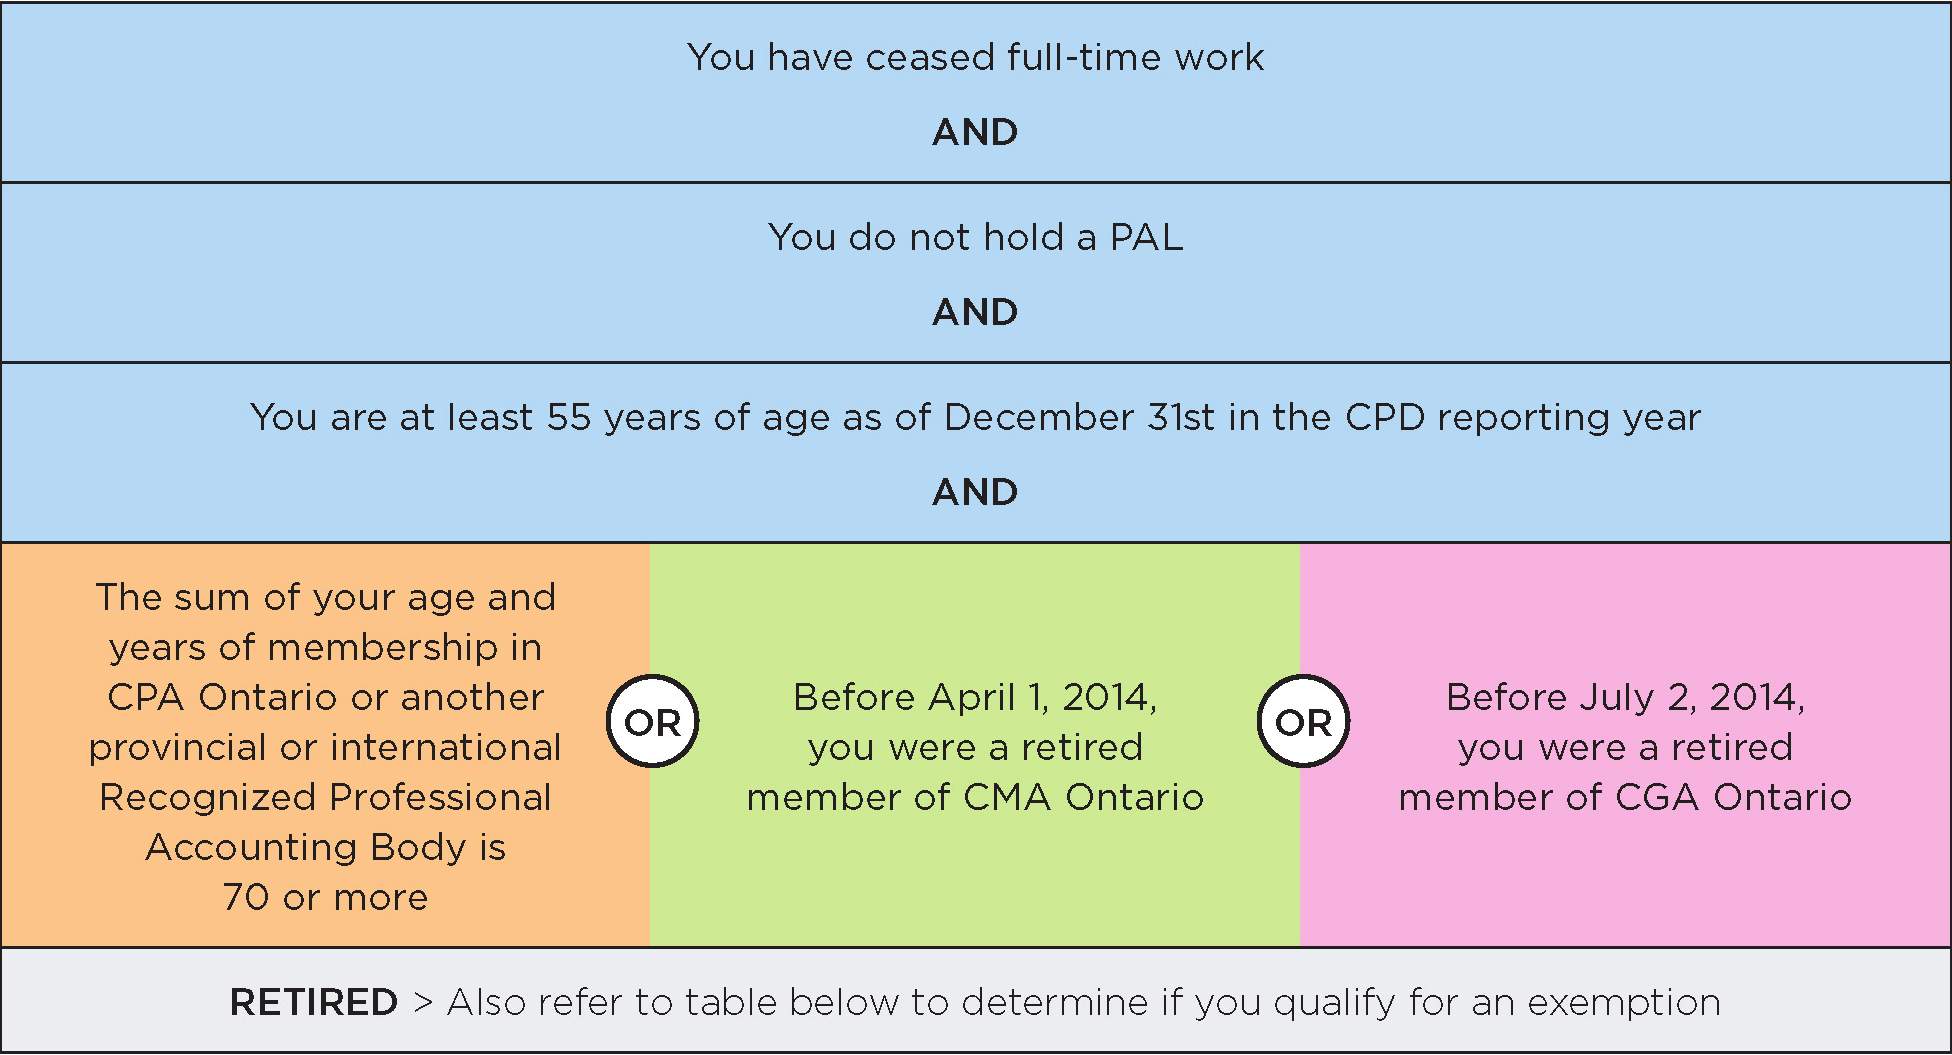 You have ceased full-time work and you do not hold a PAL and you are at least 55 years of age as of December 31st in the CPD reporting year. And you meet one of the following conditions: the sum of your age and years of membership in CPA Ontario or another provincial or international Recognized Professional Accounting Body is 70 or more, or before April 1, 2014, you were a retired member of CMA Ontario, or before July 2, 2014, you were a retired member of CGA Ontario. Retired, also refer to table below to determine if you qualify for an exemption.